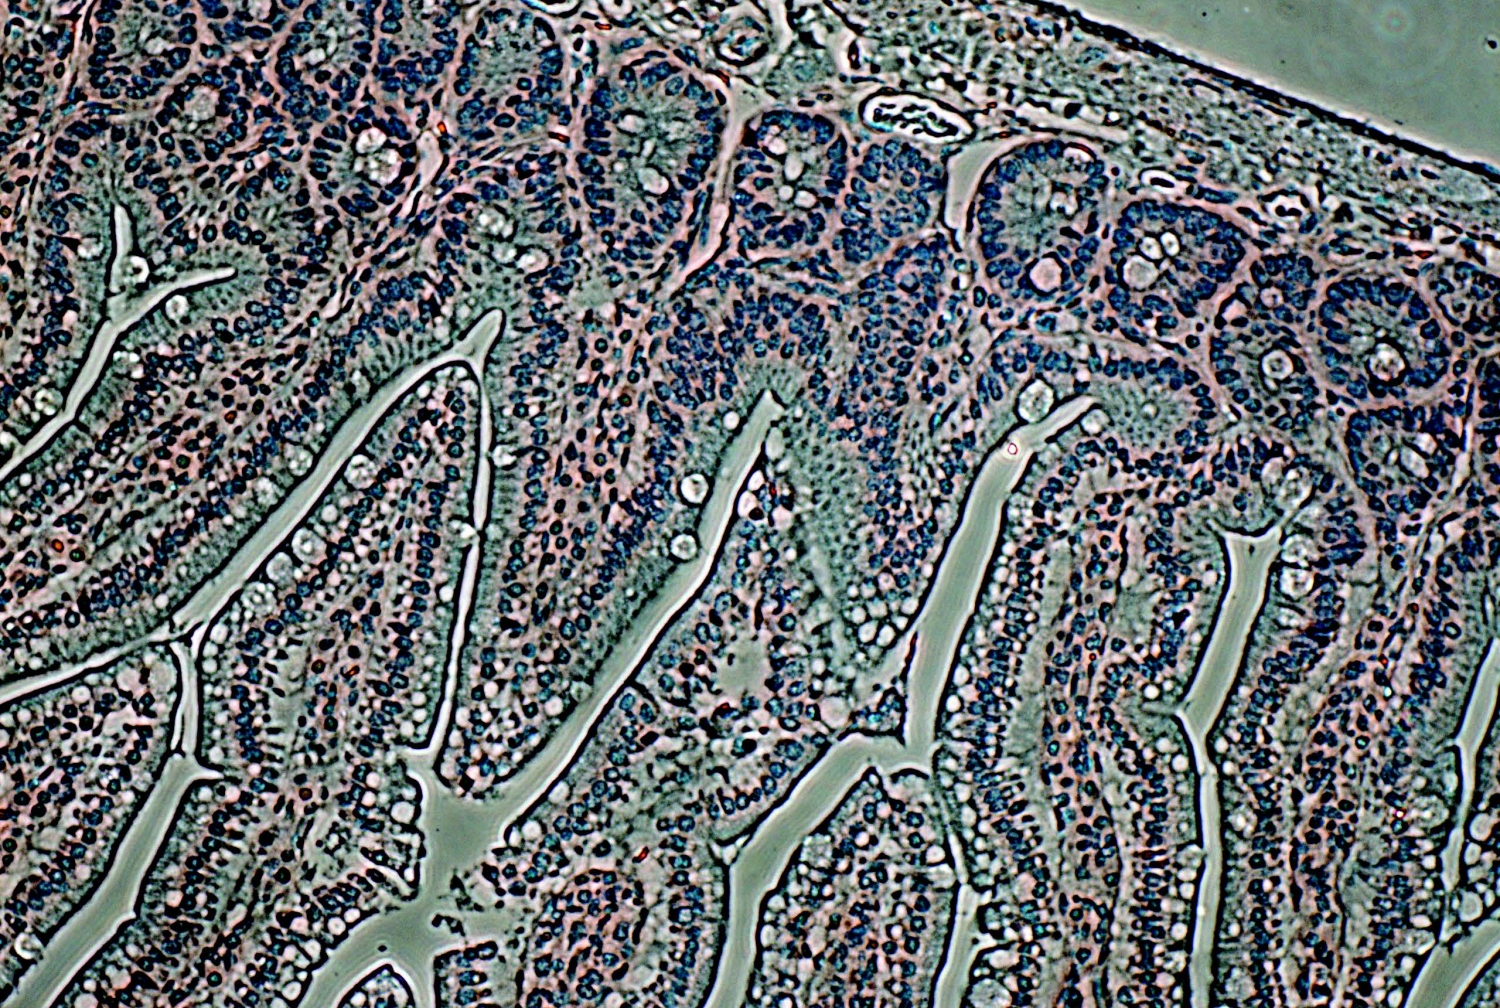 magnified cross-section of the lower gastrointestinal tract of a mouse genetically